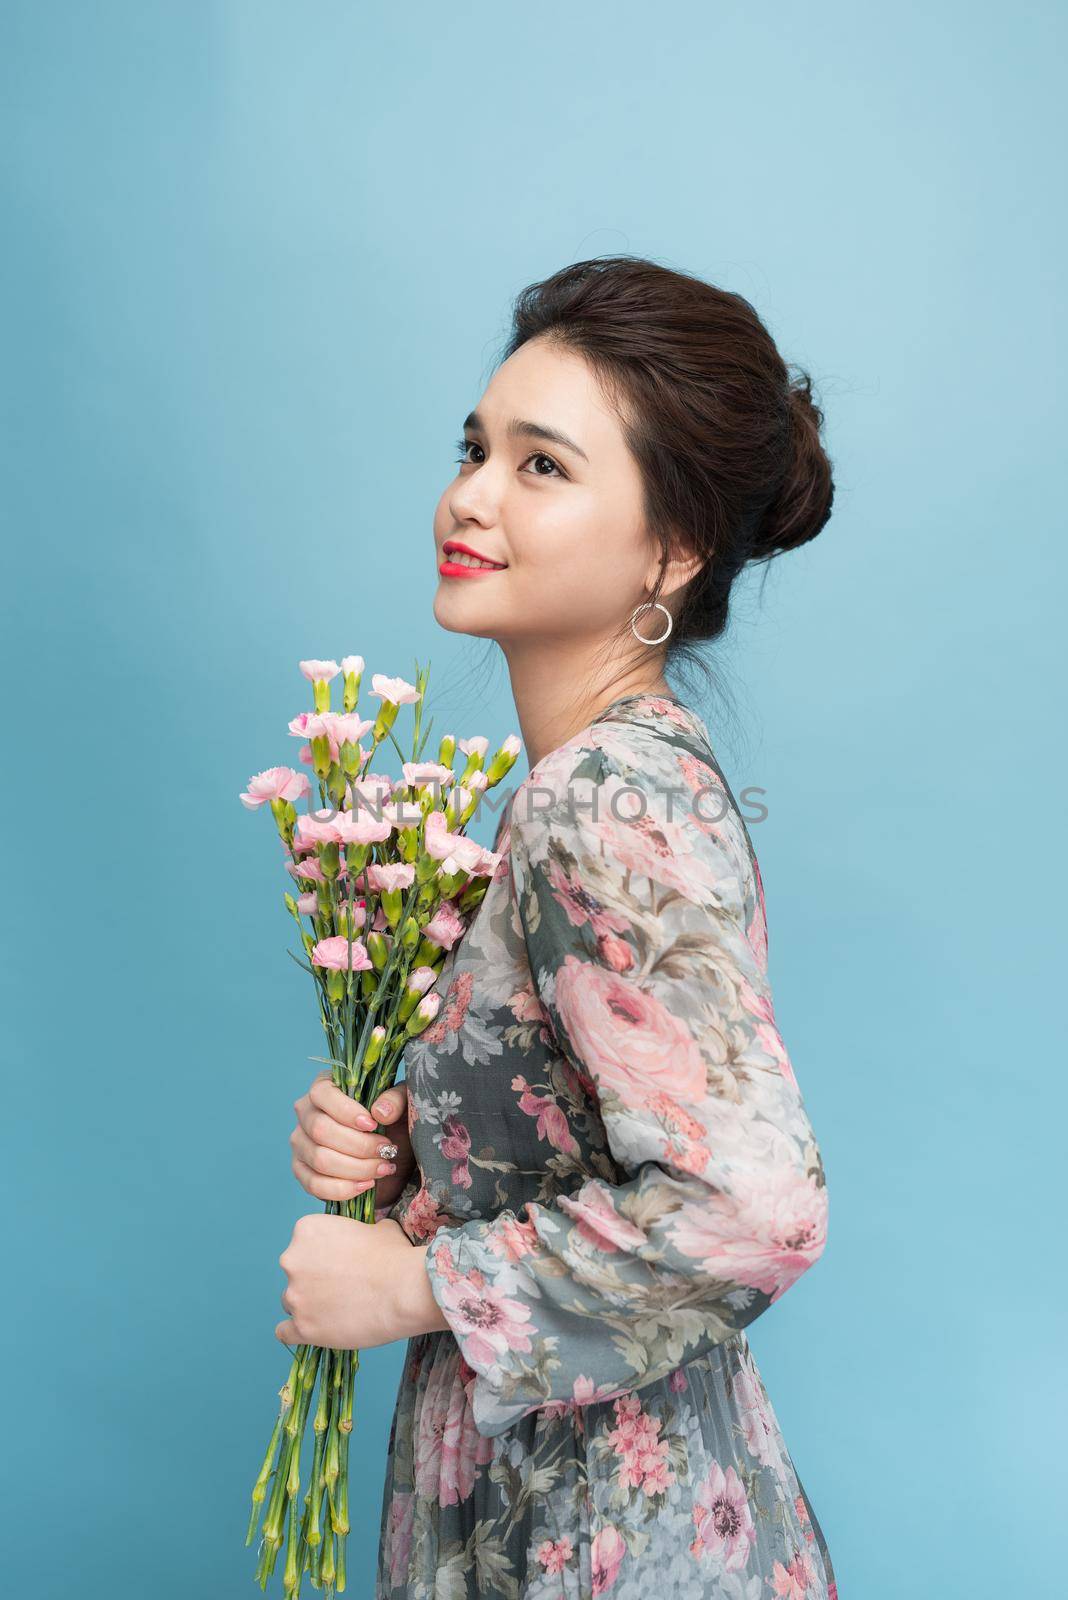 Attractive Asia woman in romantic dress holding bouquet of flowers over blue background